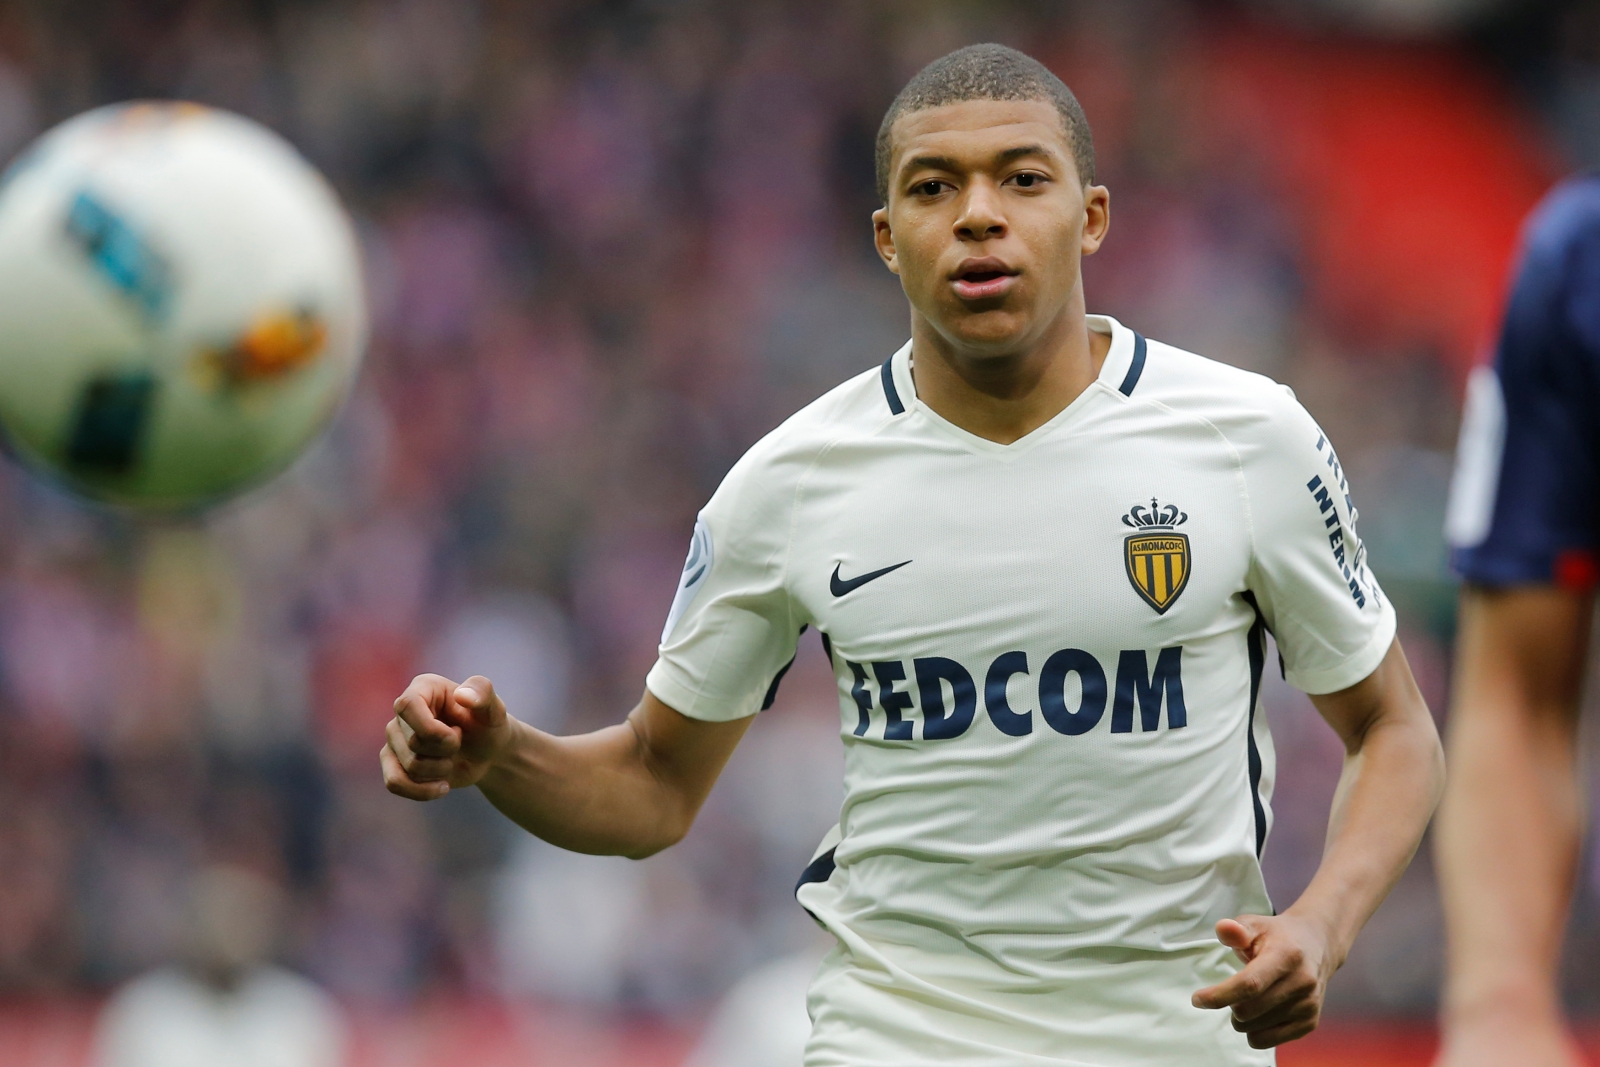 Arsene Wenger confirms Arsenal were very close to signing Kylian Mbappe last season